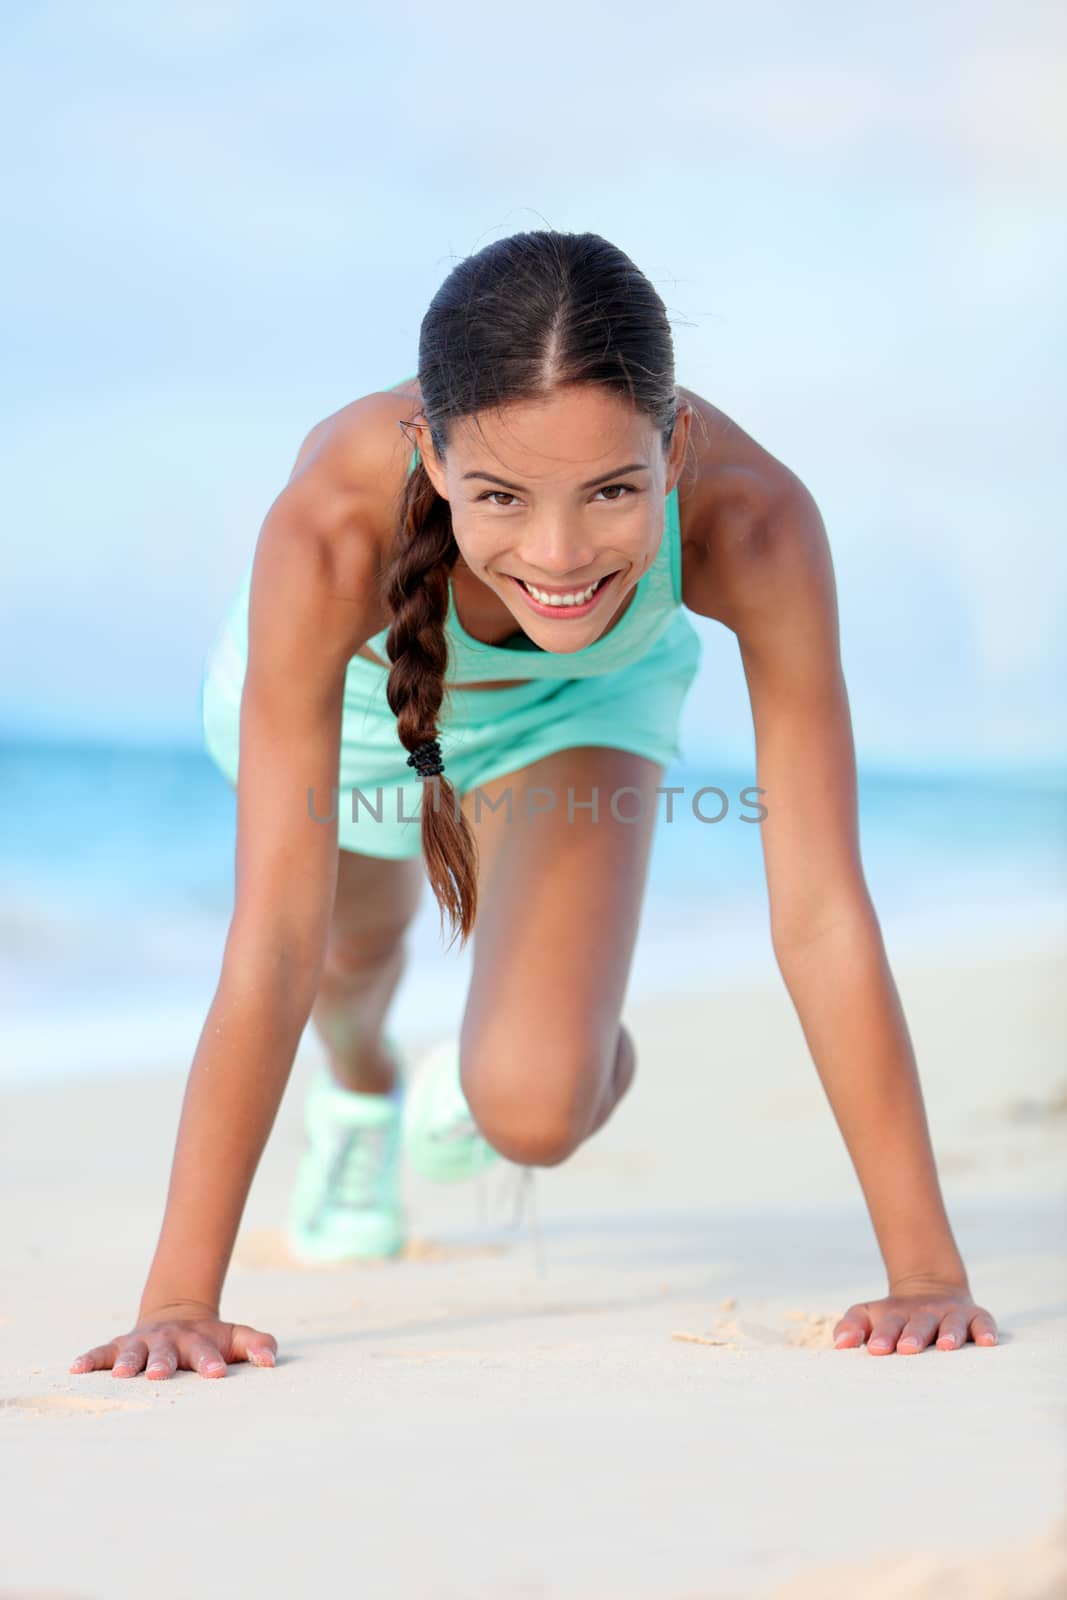 Fitness girl training core abs doing mountain climber workout exercises on beach by Maridav